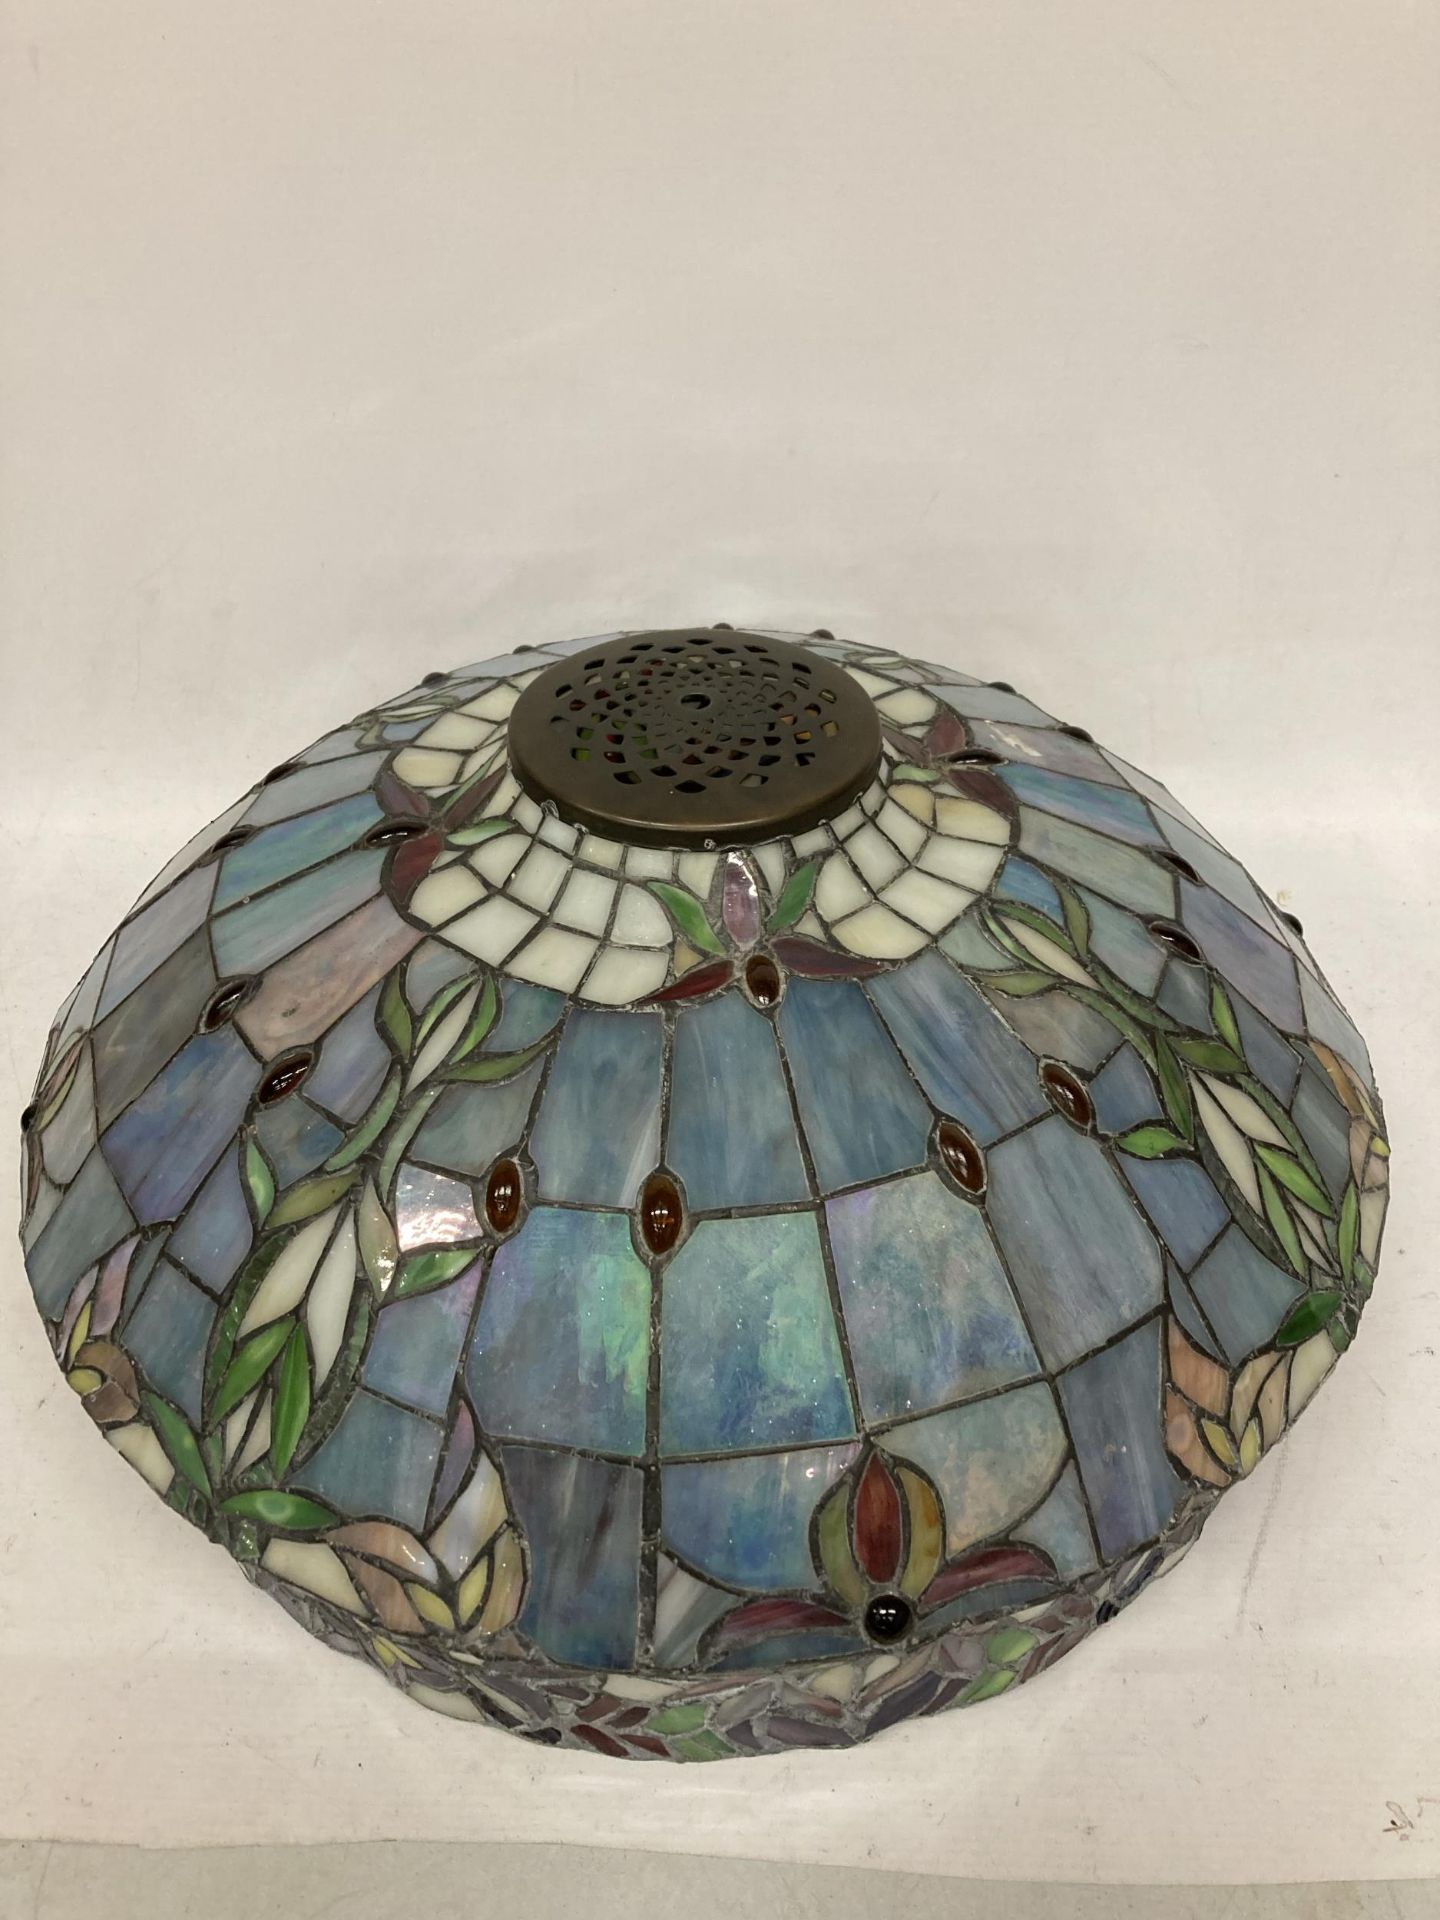 A VINTAGE TIFFANY STYLE LEADED GLASS CEILING LIGHT SHADE - Image 2 of 3